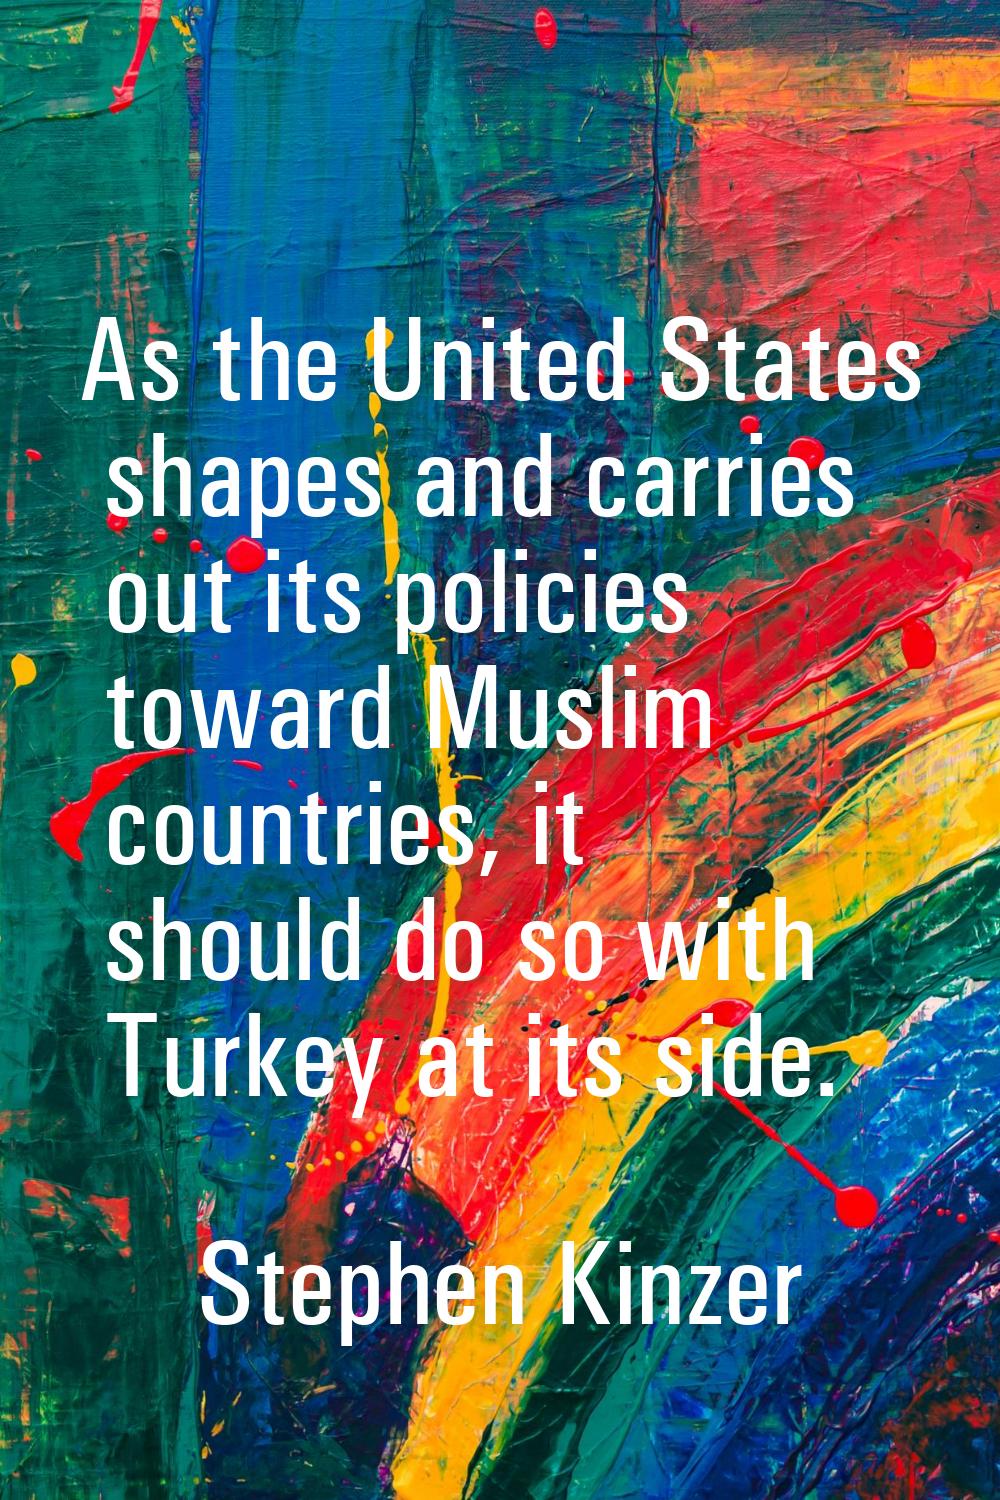 As the United States shapes and carries out its policies toward Muslim countries, it should do so w